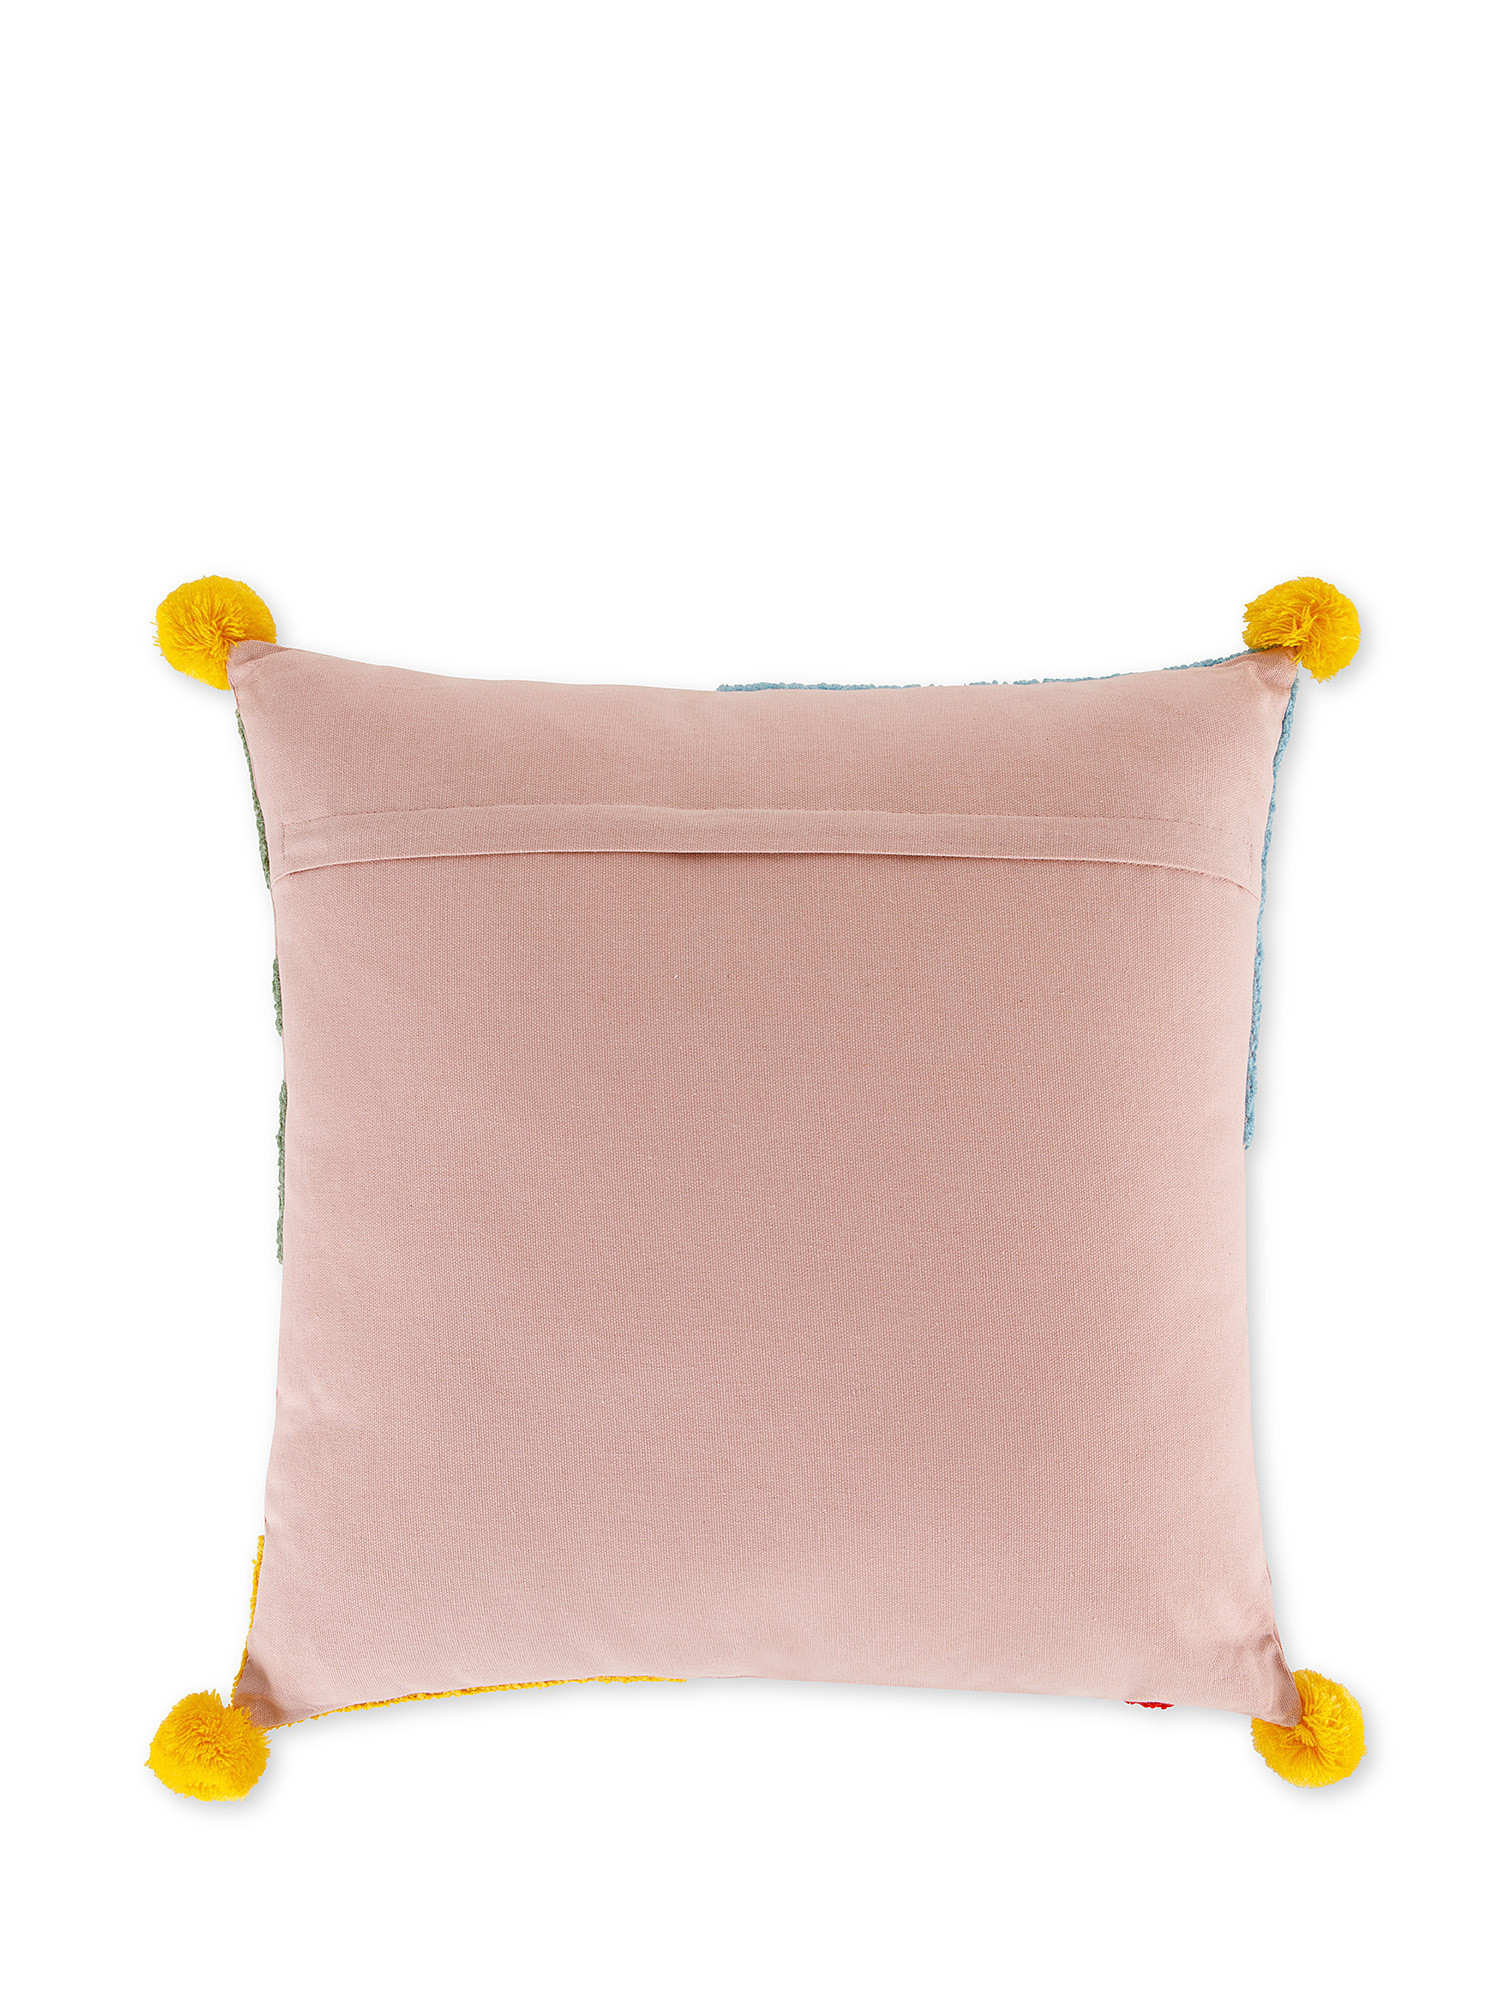 Marine embroidery cushion 45x45cm, Pink, large image number 1